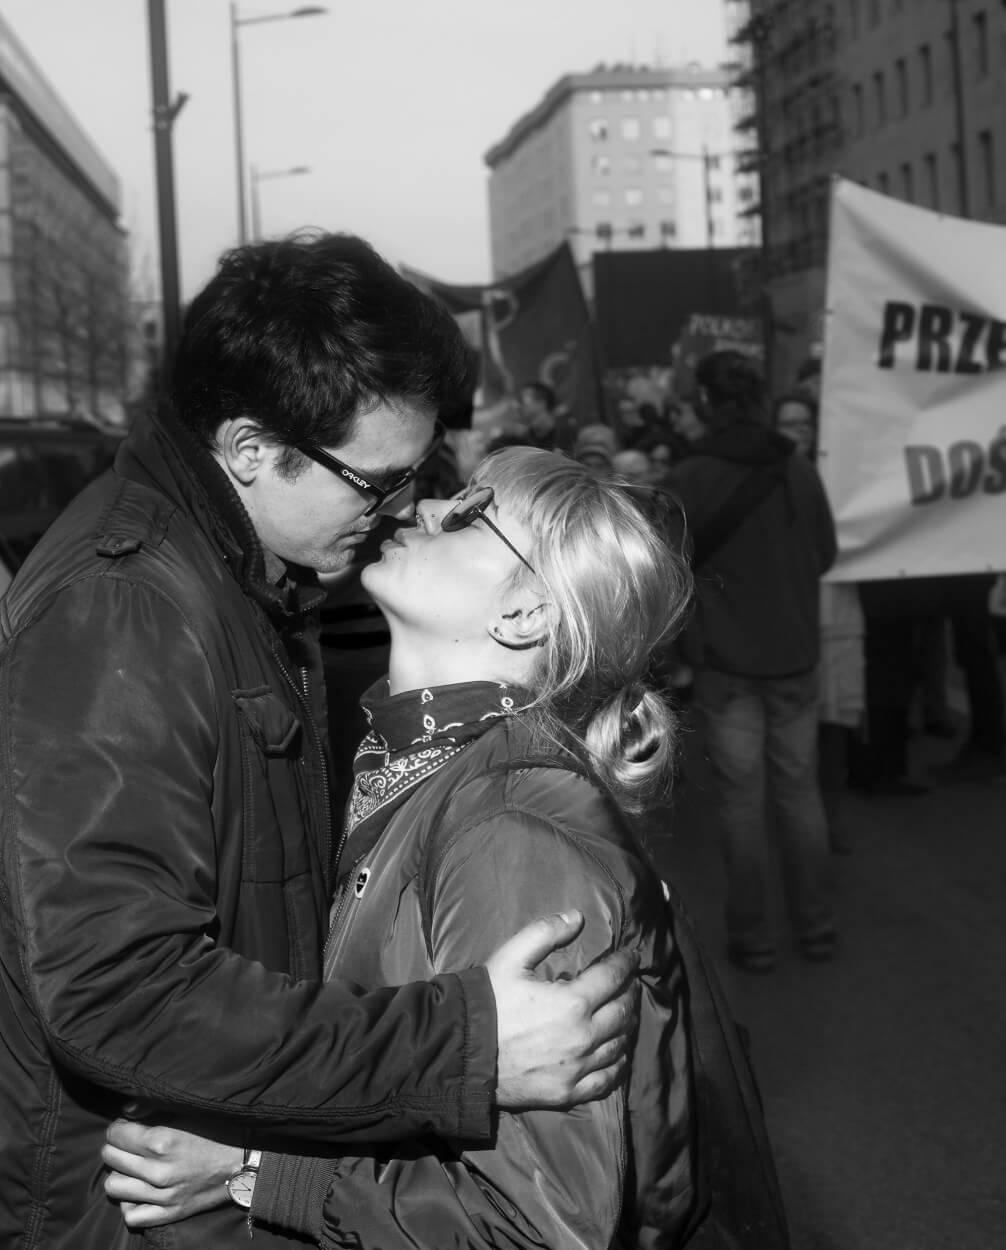 A couple shares a kiss during a protest